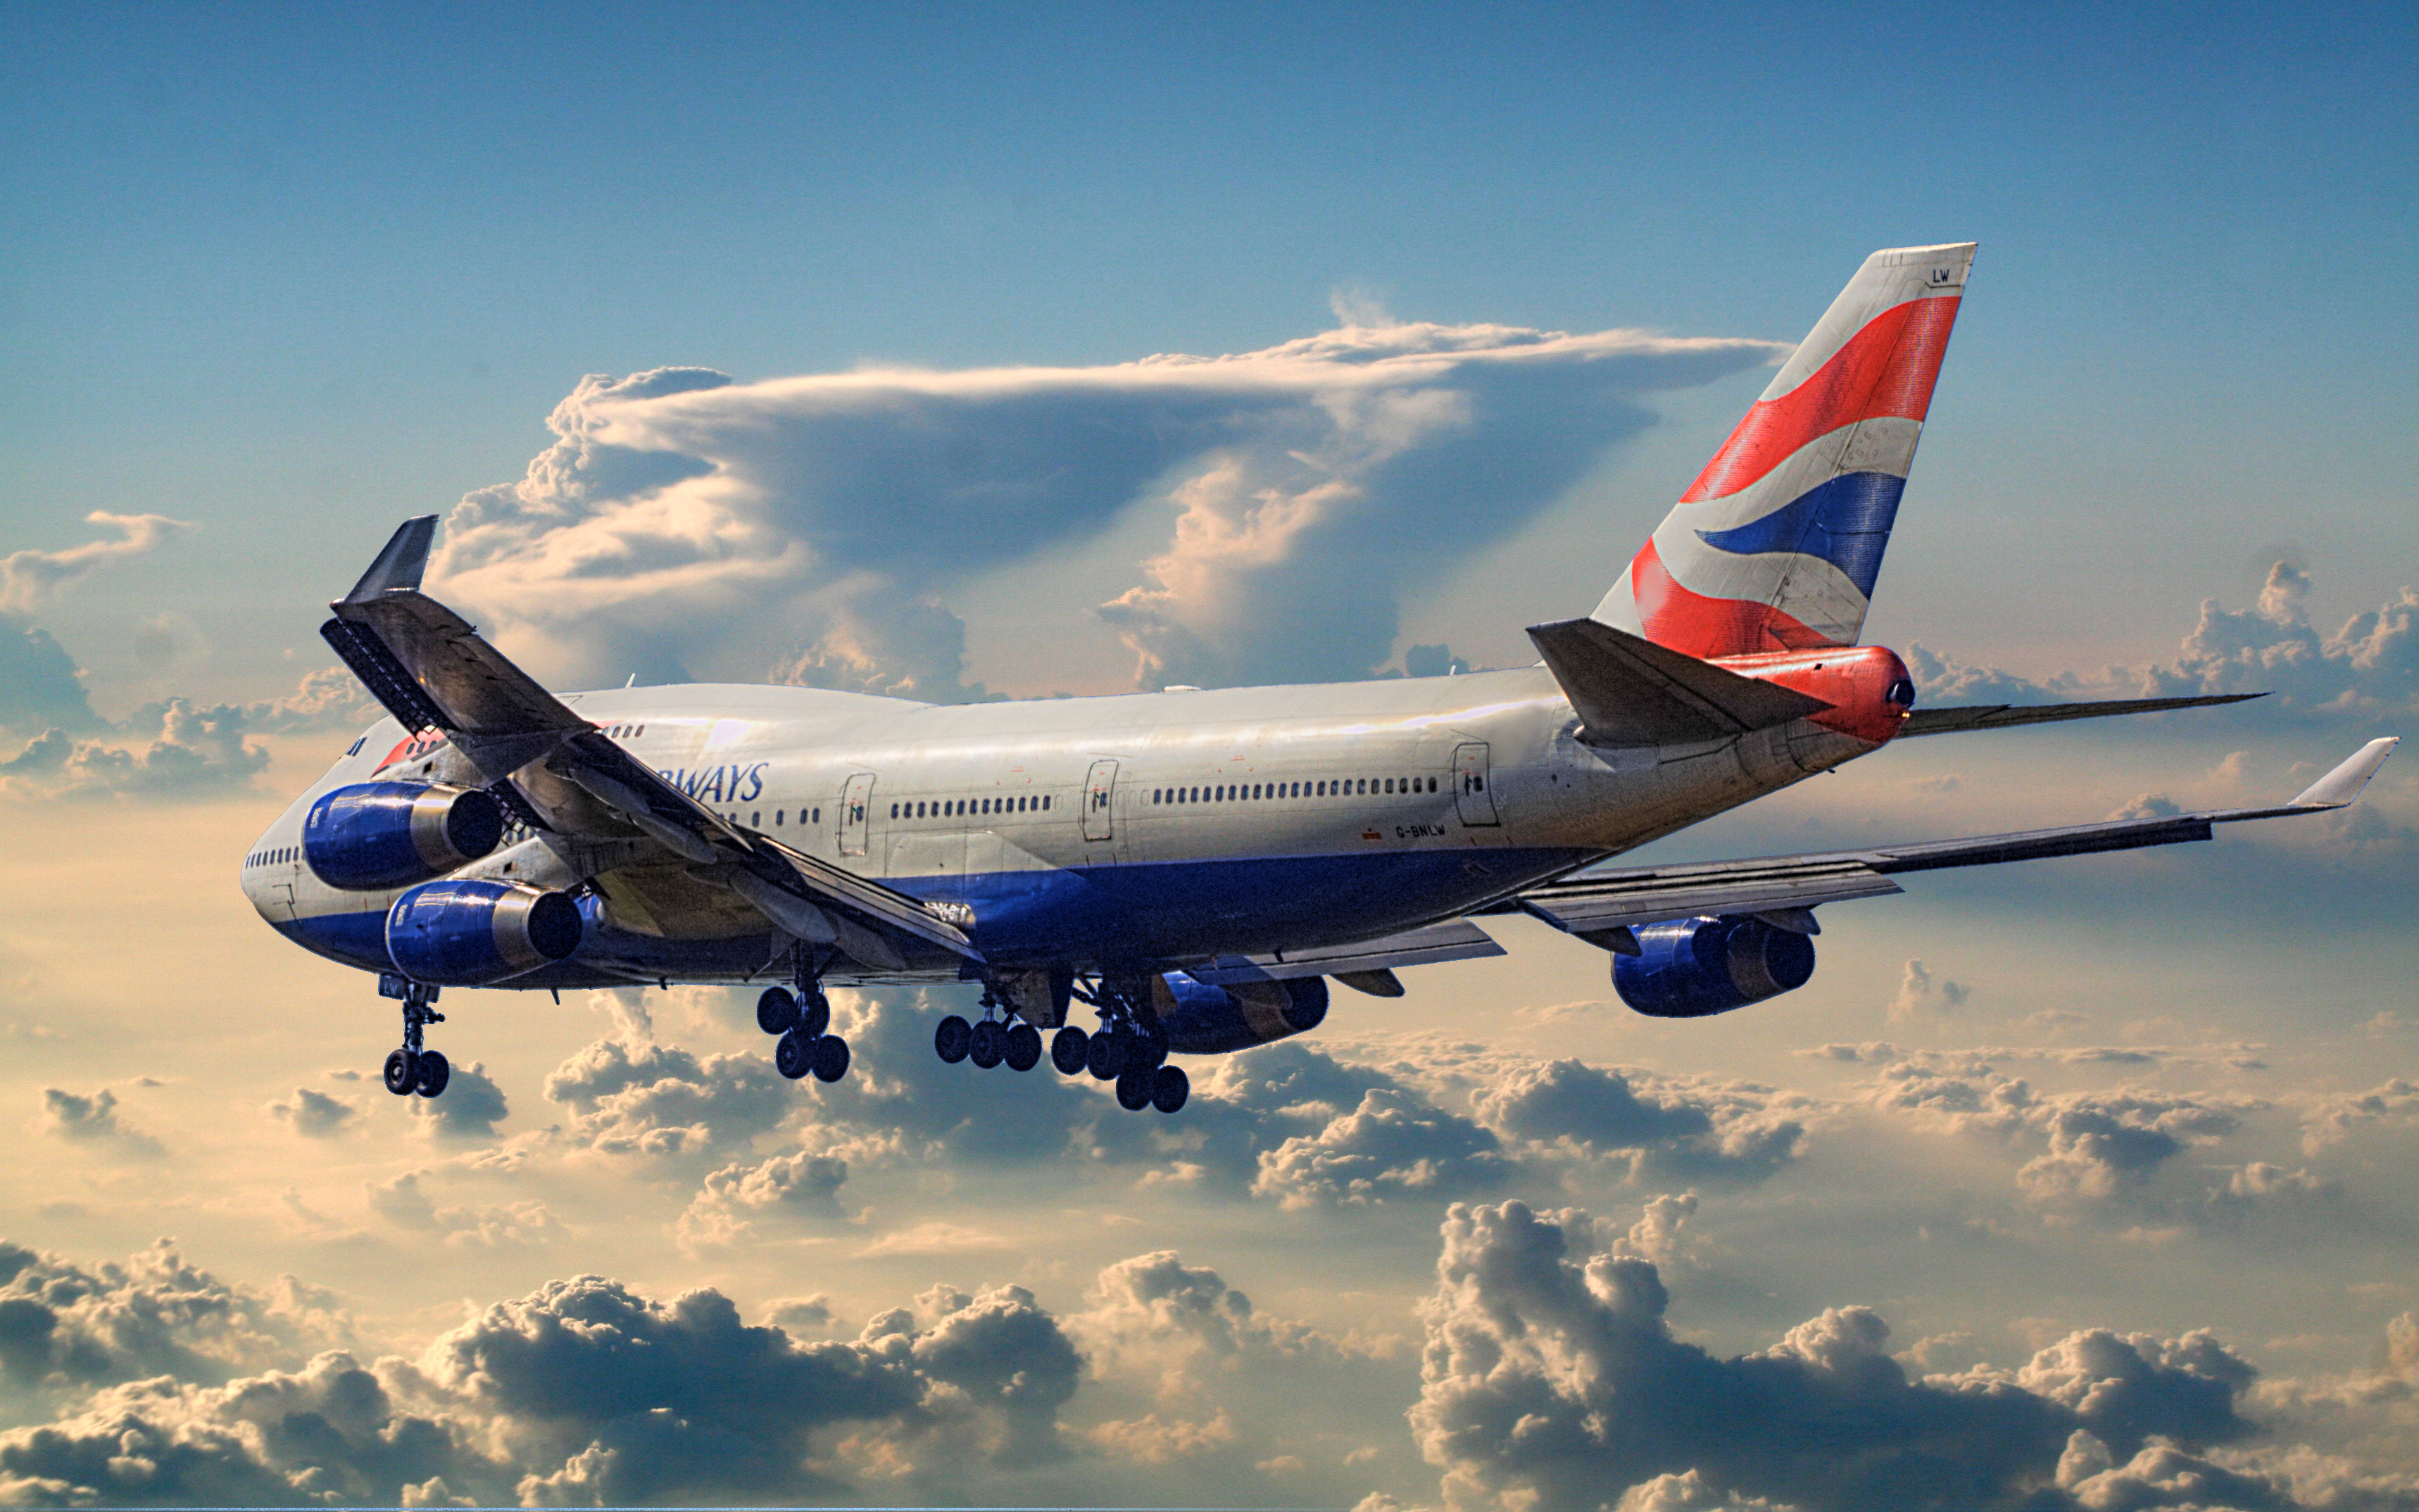 Reminder: Earn less Avios with British Airways as of April 28th!